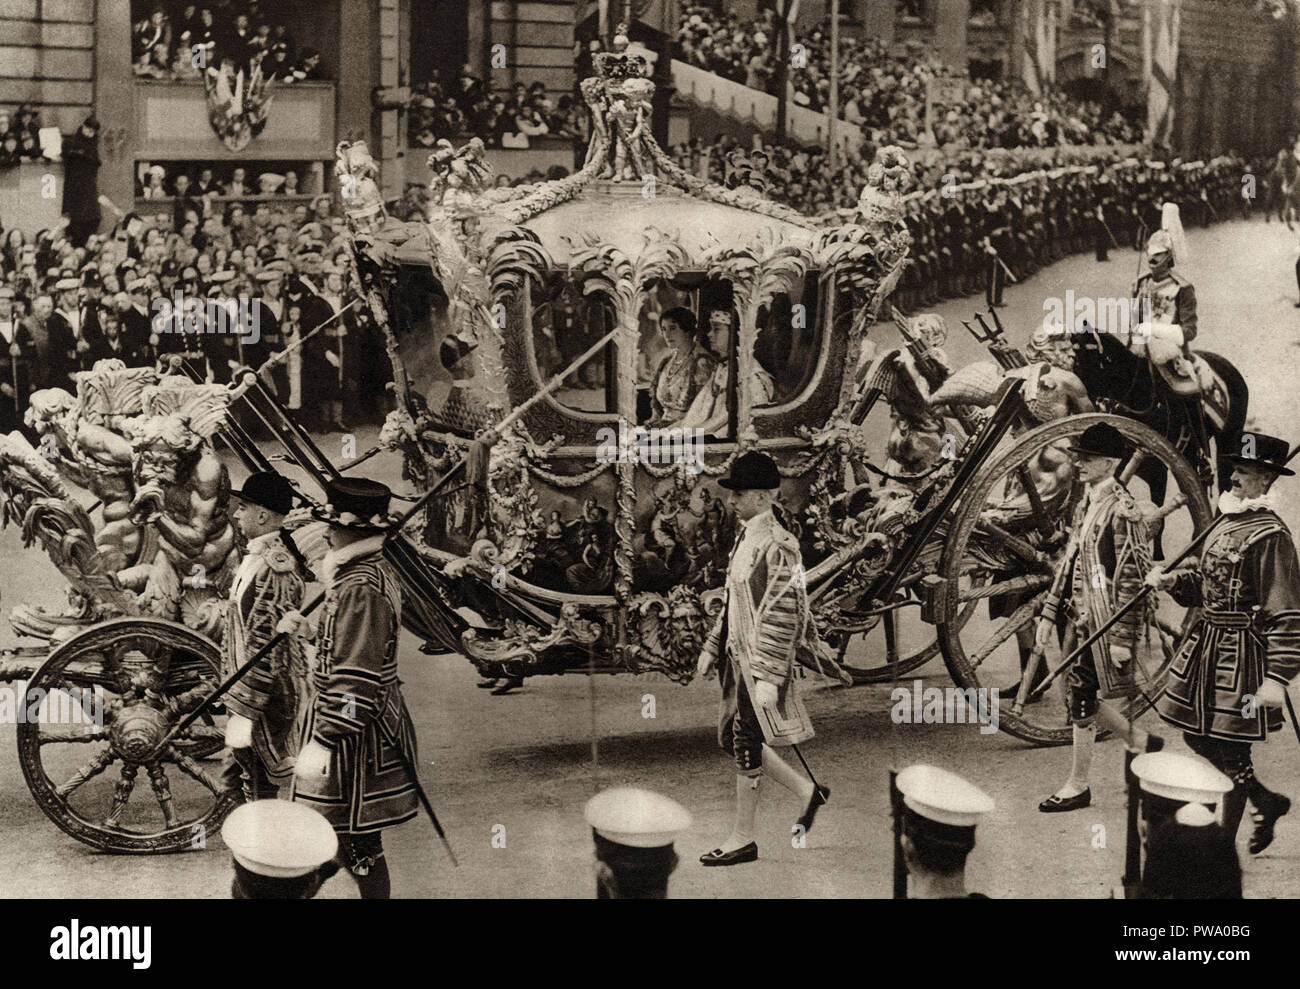 The coronation of George the sixth on May 12 1937 showing the king and queen in the Gold State Coach published in a souvenir book dated 1937 Stock Photo